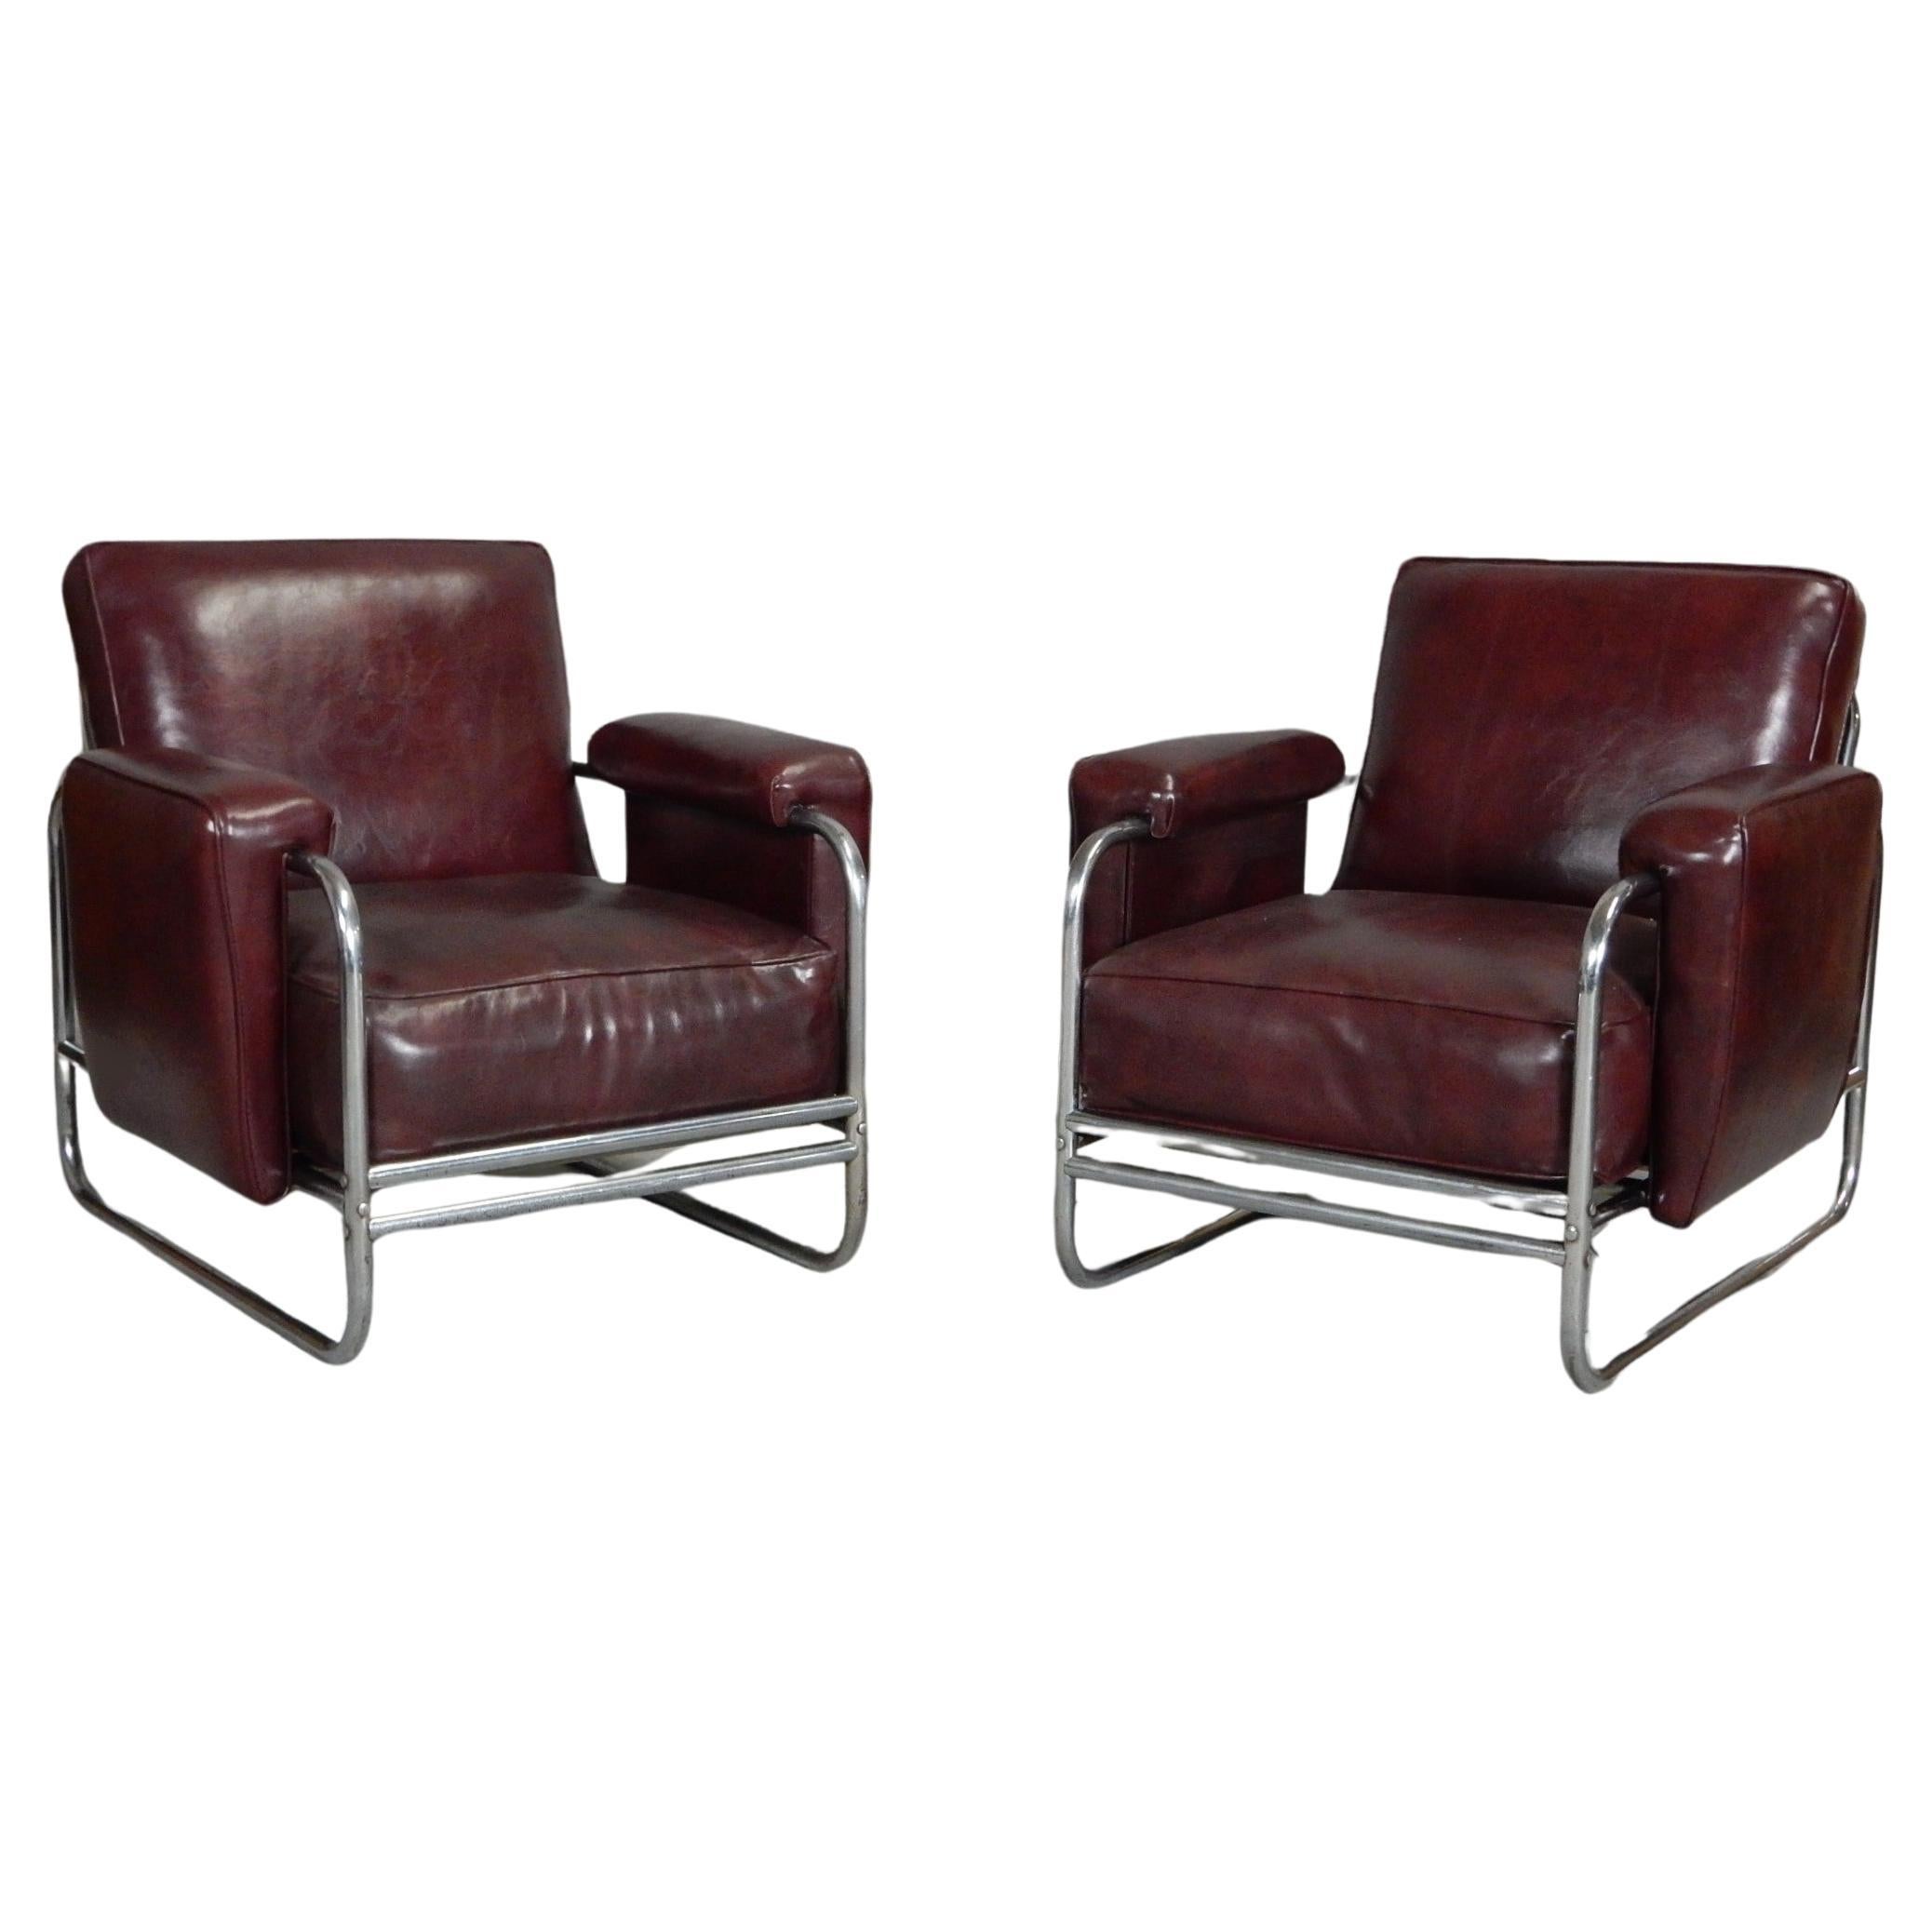 Machine age Industrial Nickel Plated Steel Lounge Chairs For Sale 4